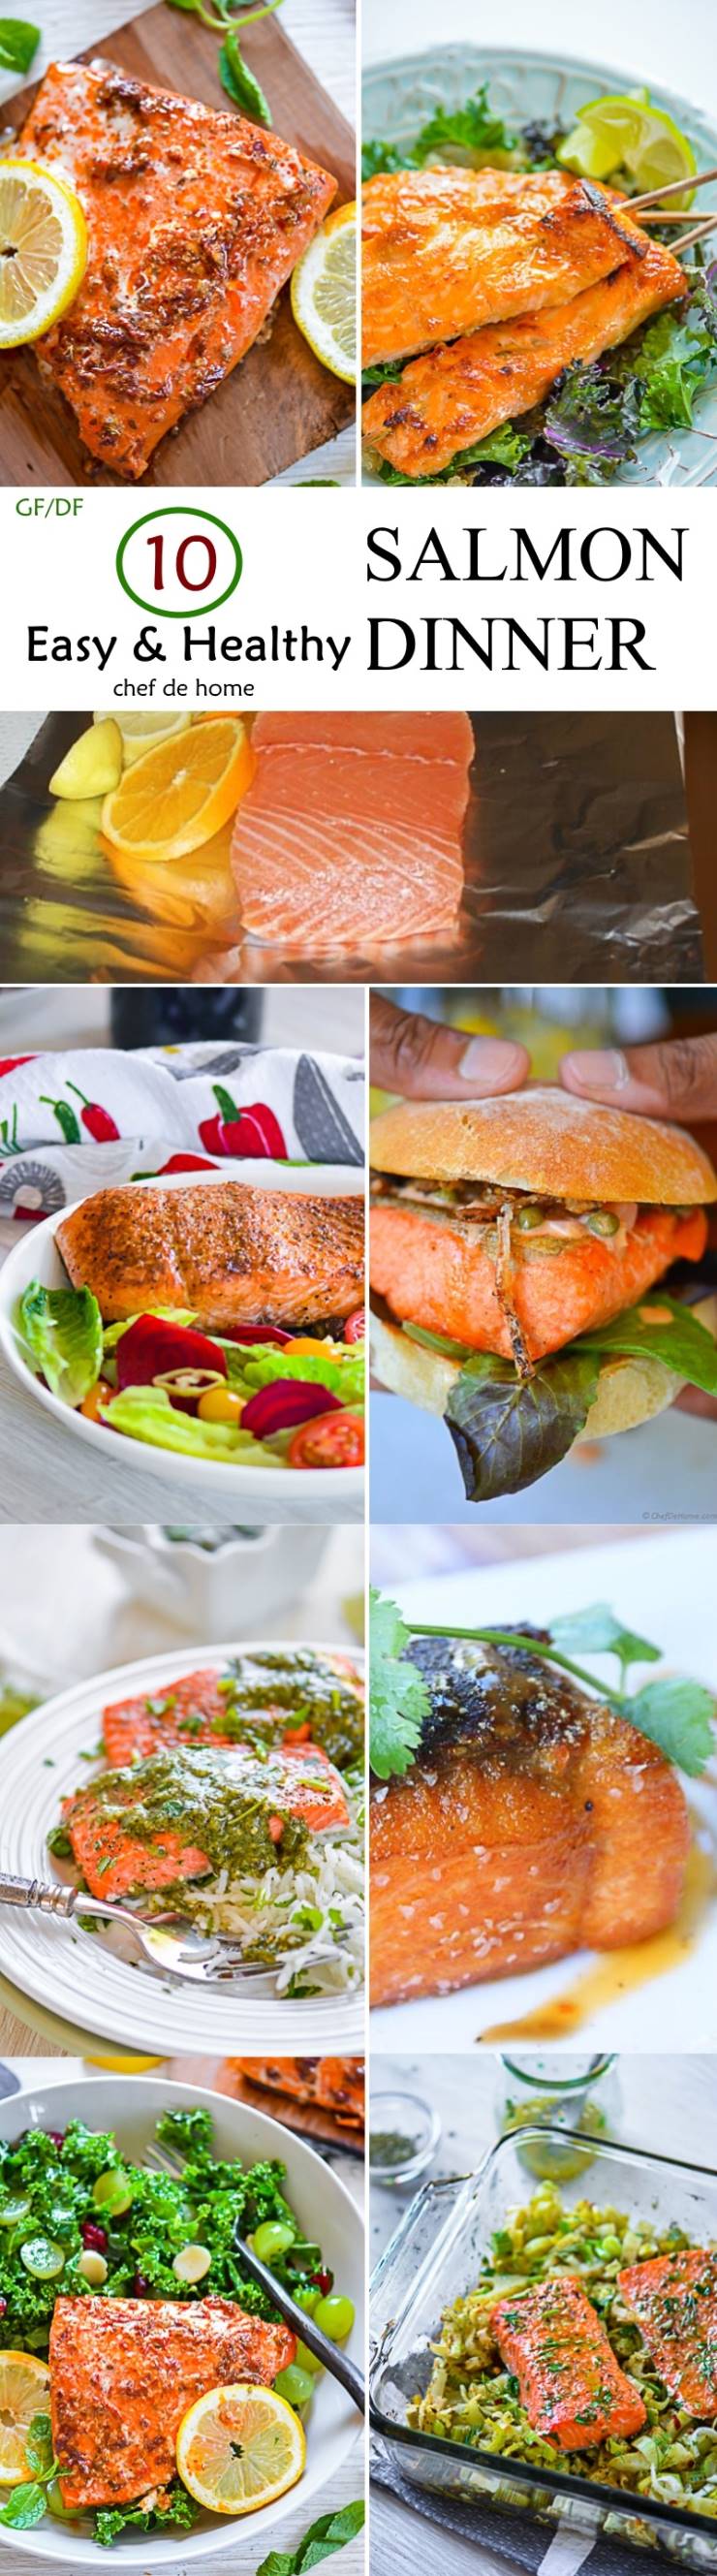 10 Easy and Healthy Salmon Recipes